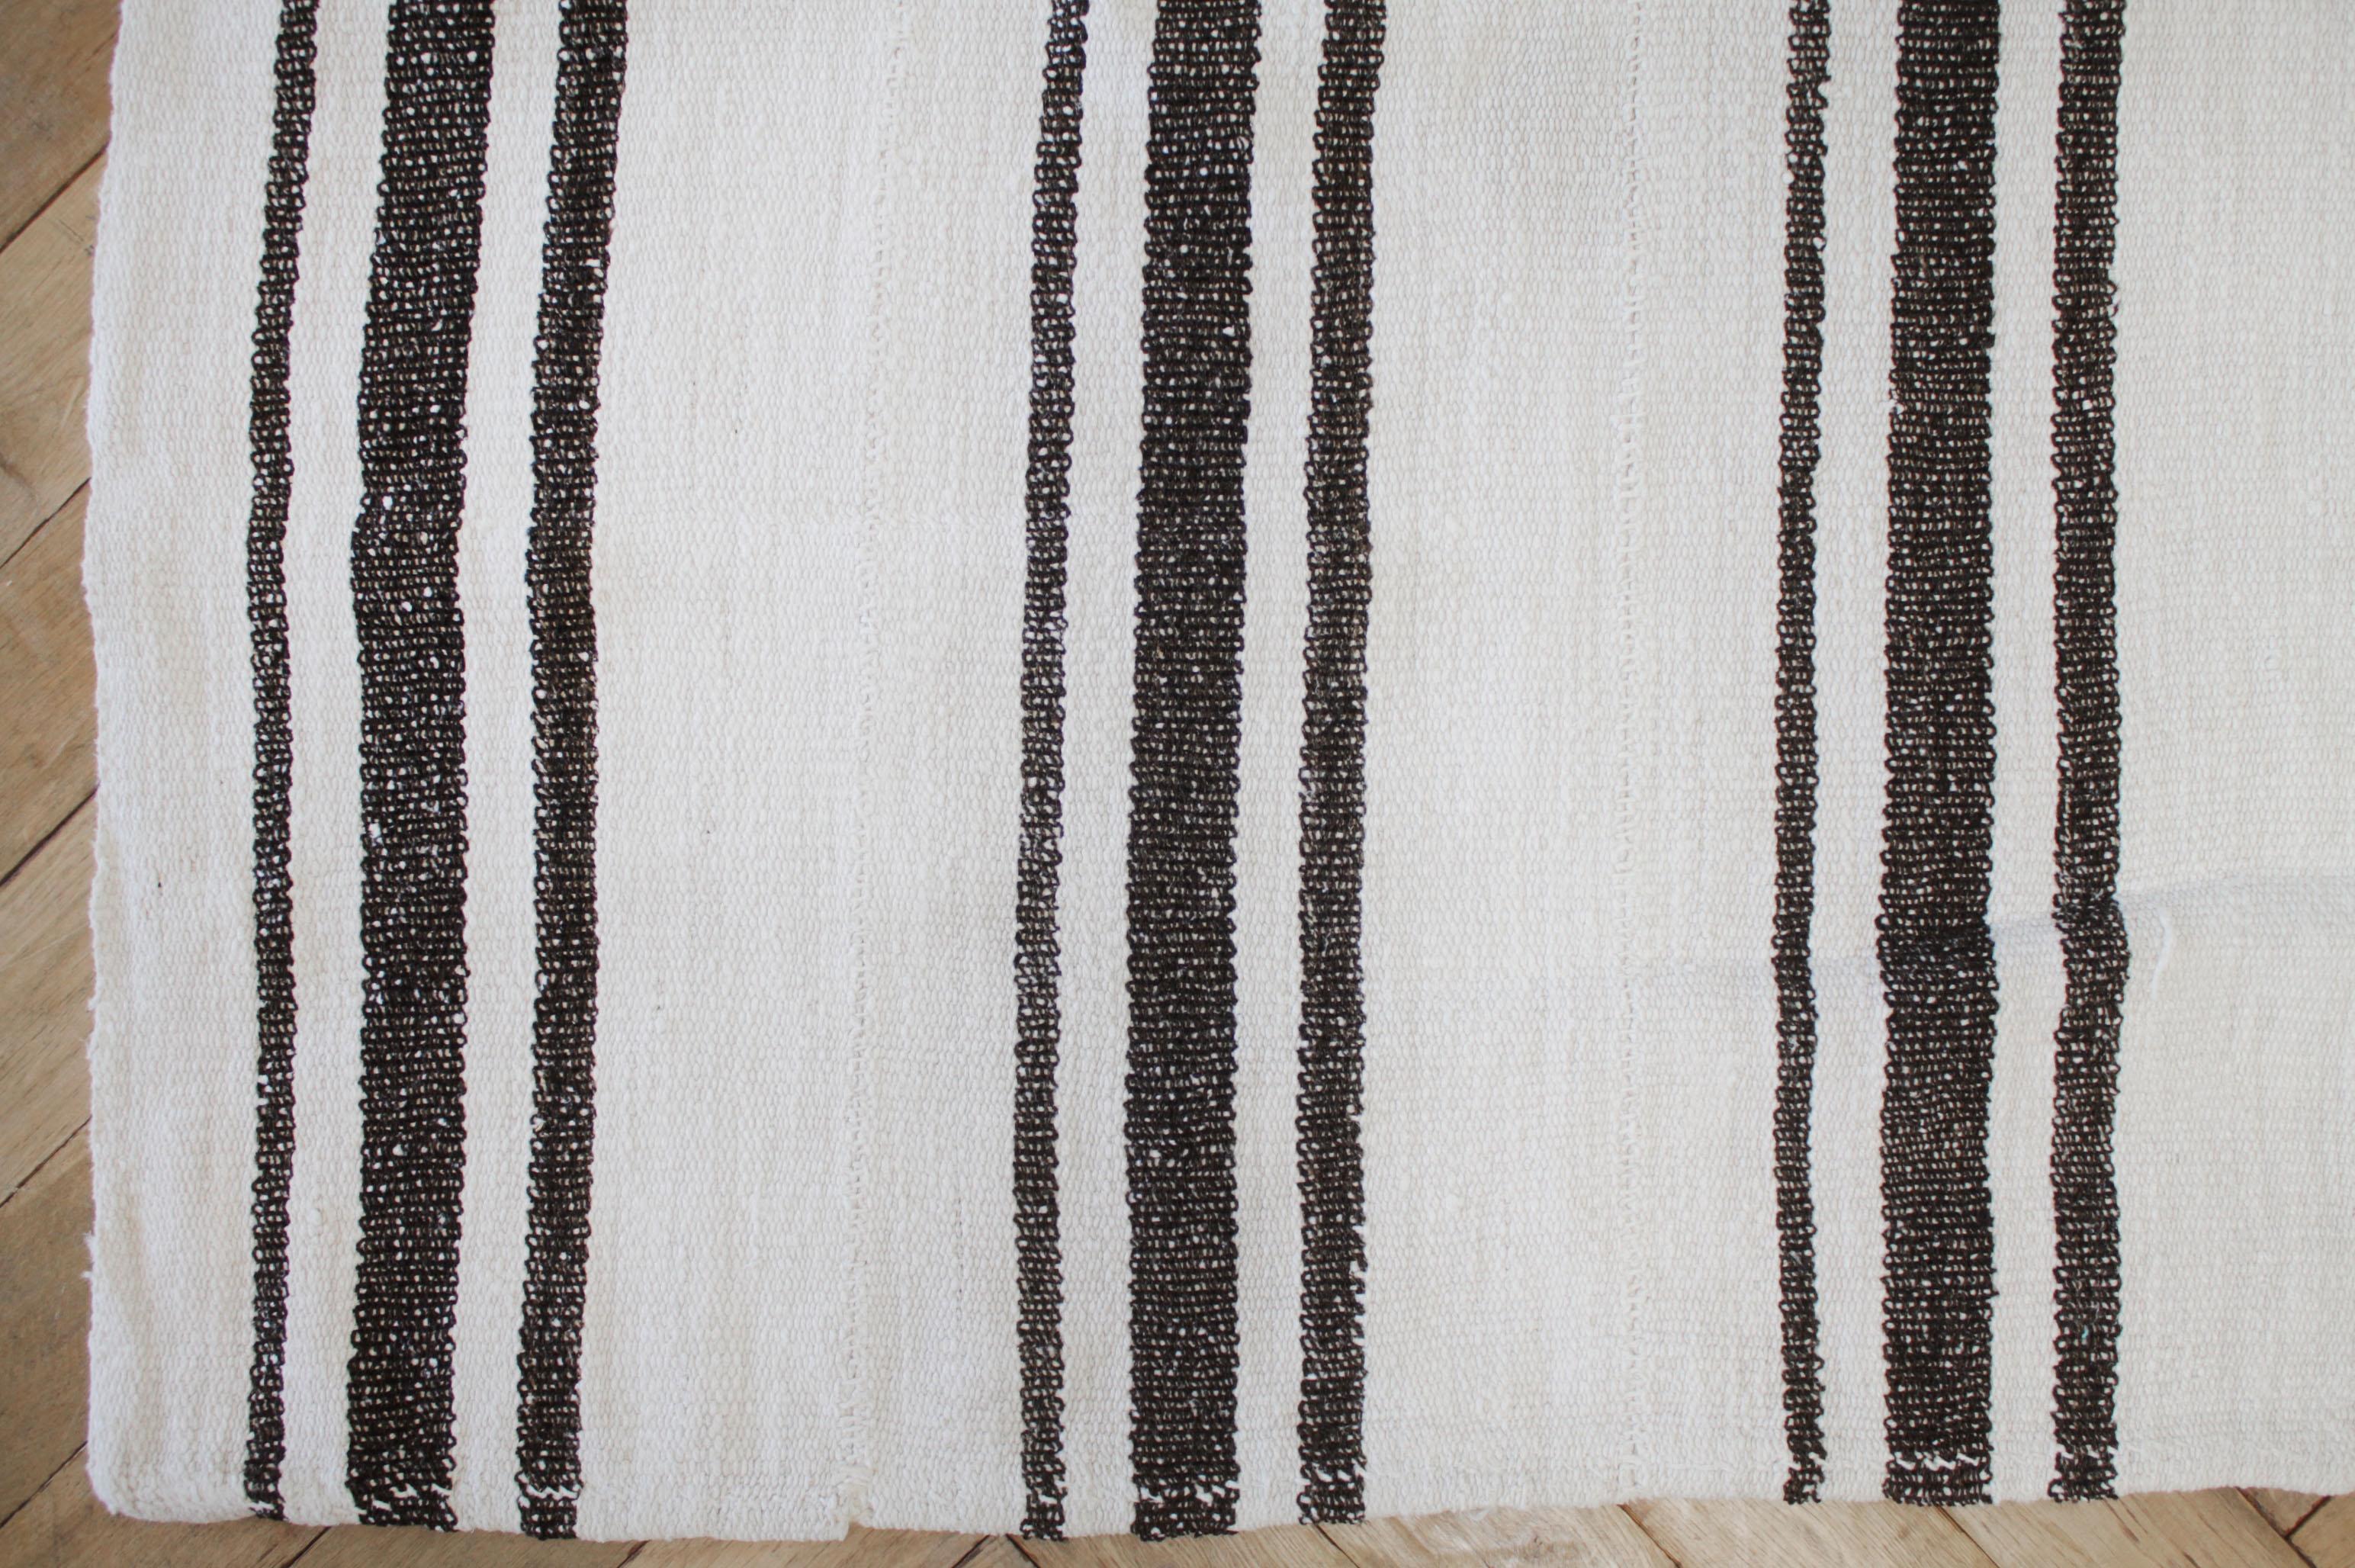 Sam rug
Vintage Turkish rug in oyster white hemp, with dark brown stripes.
Flat-weave, hemp make these extremely durable with great use for high traffic areas. This item has been cleaned, and is ready for use. Machine washable.
Rug size: 67